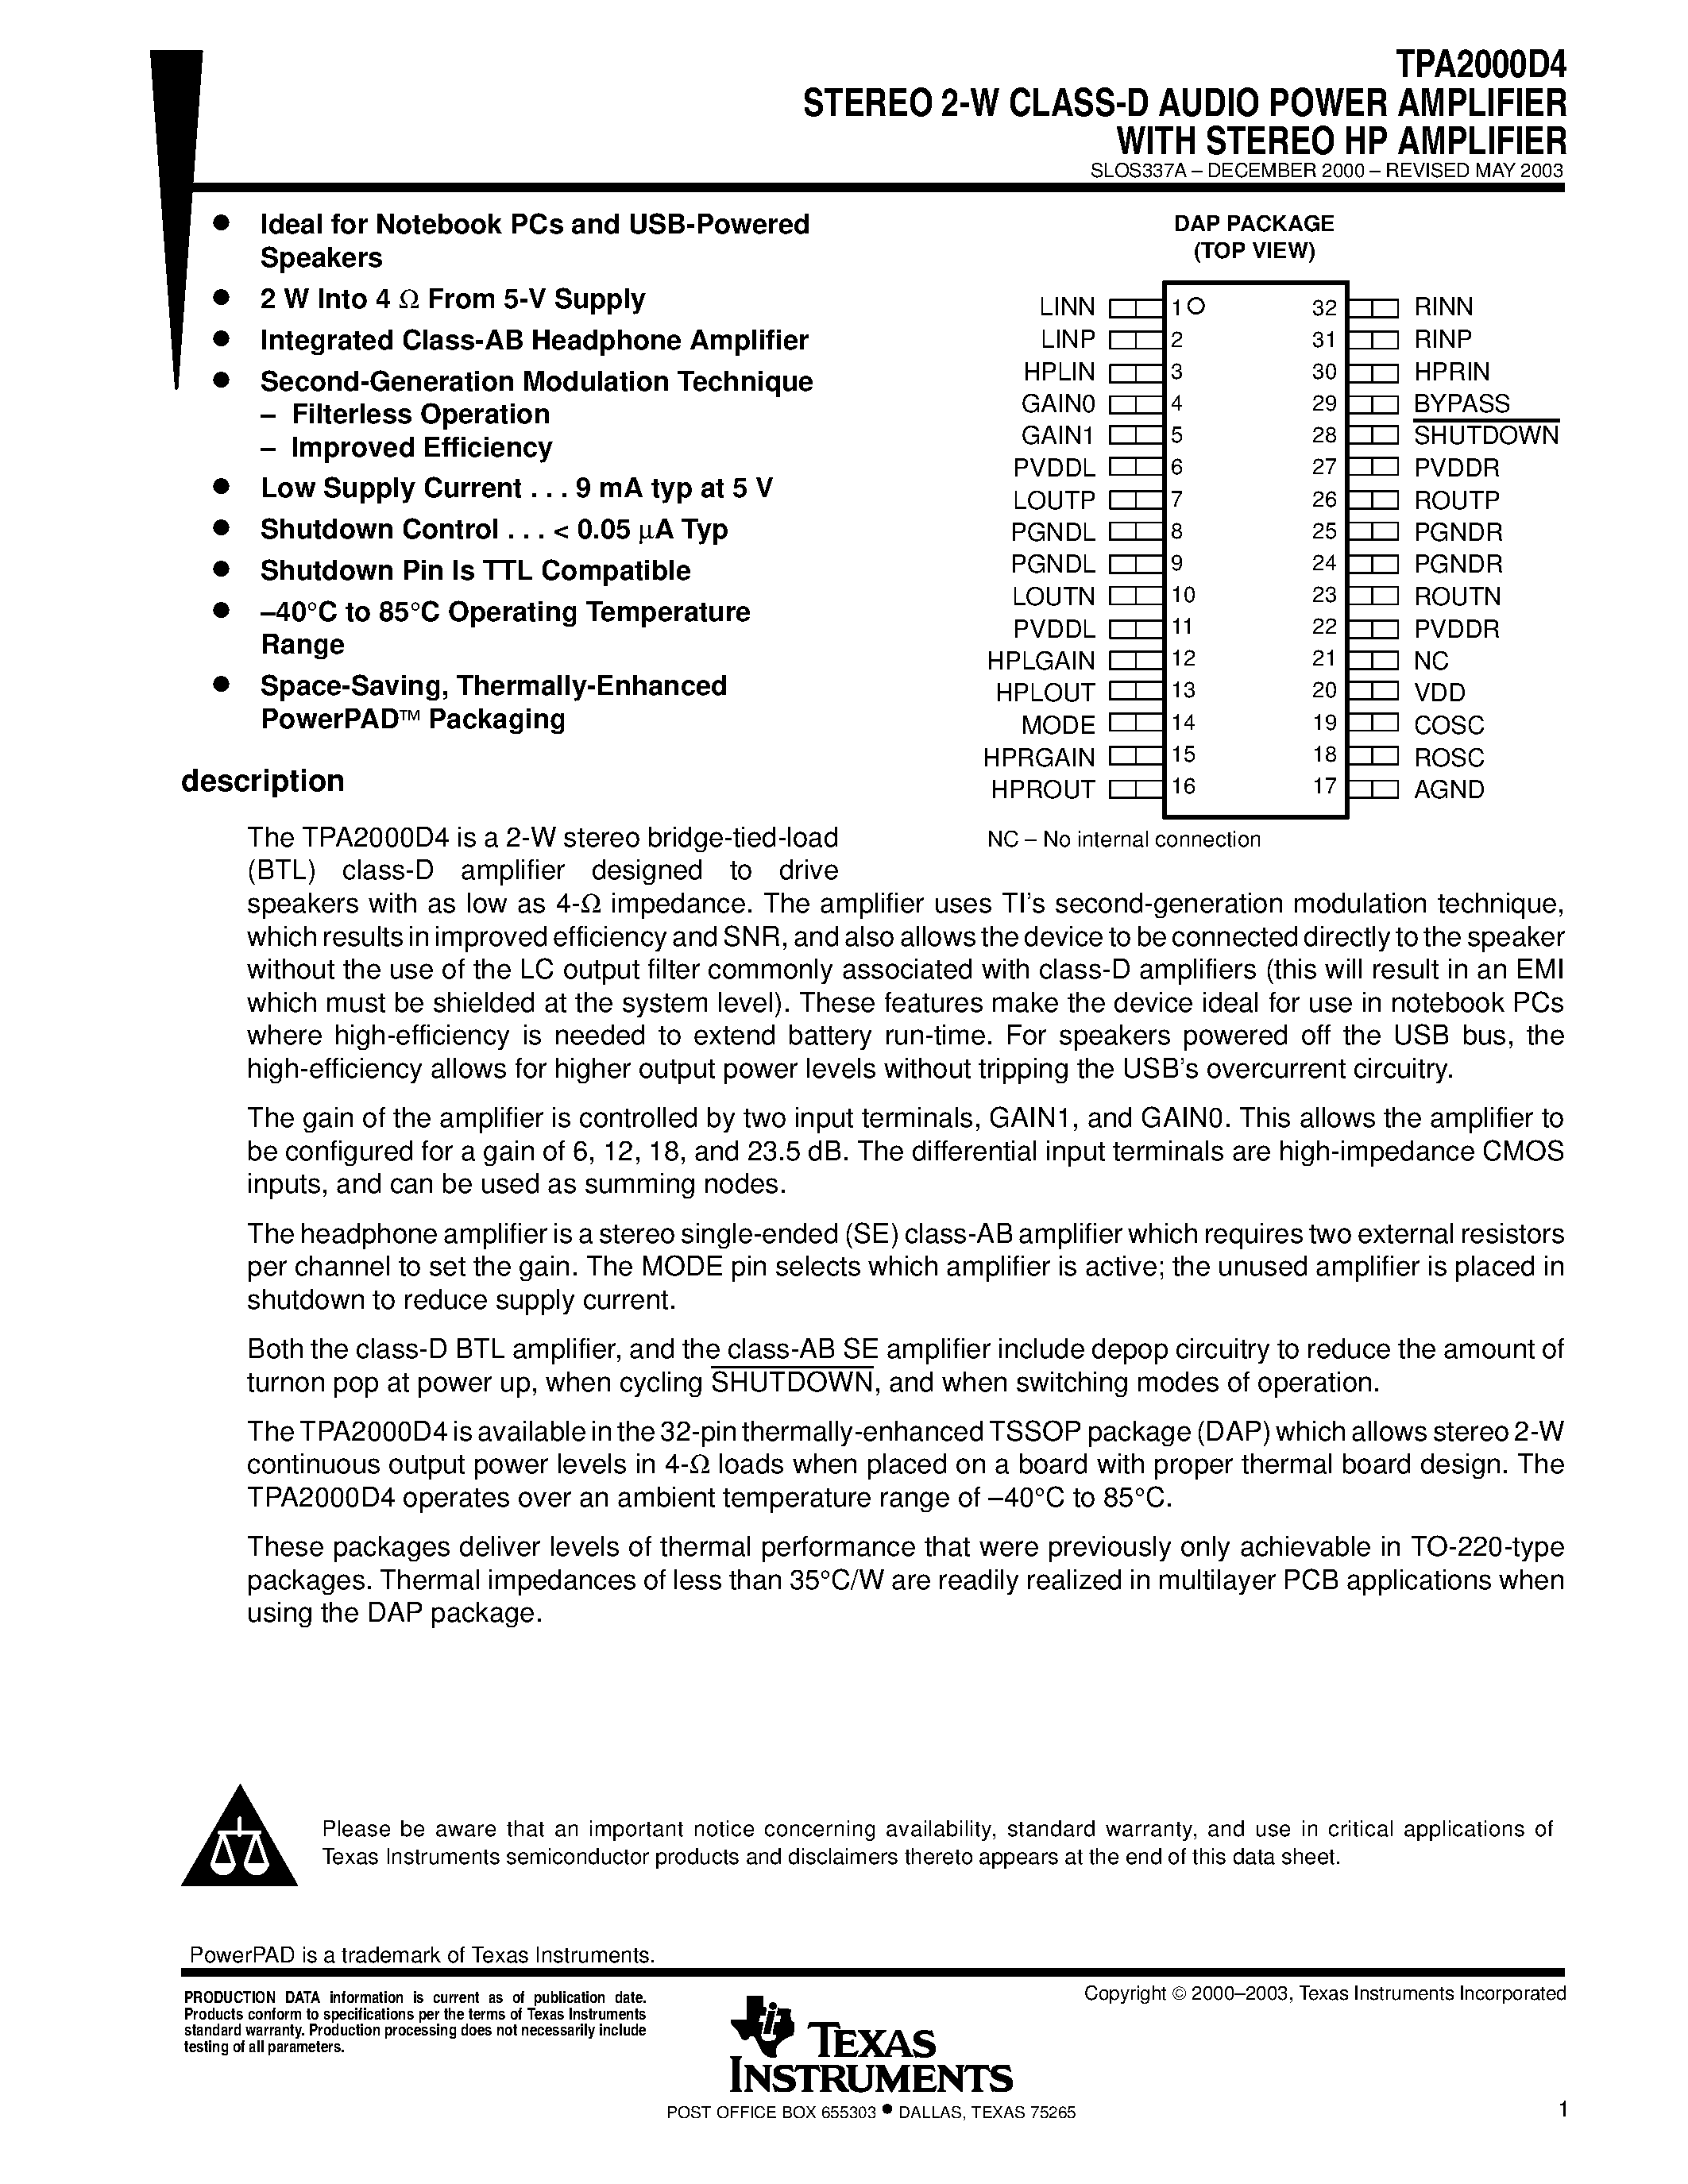 Datasheet TPA2000D4 - STEREO 2-W CLASS-D AUDIO POWER AMPLIFIER WITH STEREO HP AMPLIFIER page 1